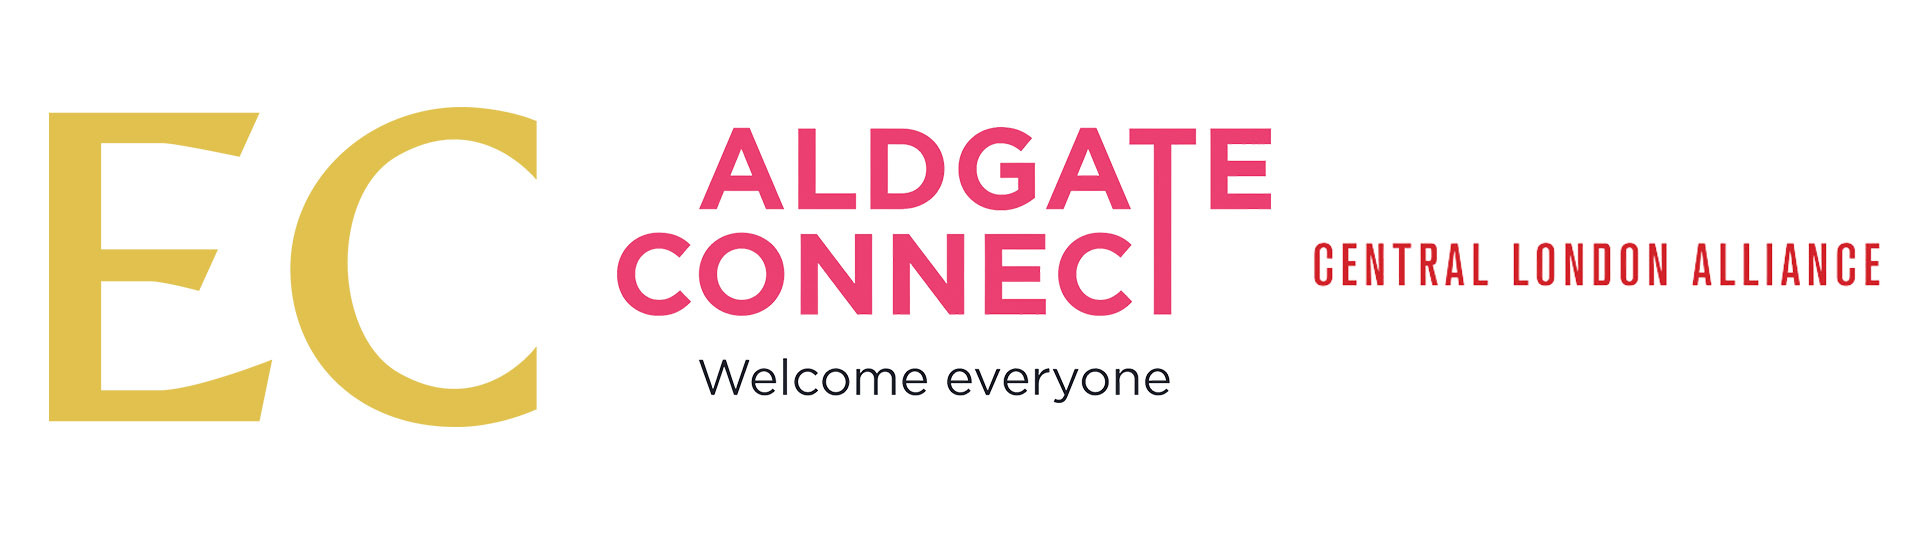 Three logos - EC BID (large gold letters E and C), Aldgate Connect (pink writing Aldgate Connect, black writing underneath Welcome everyone), and Central London Alliance (red wording Central London Alliance).